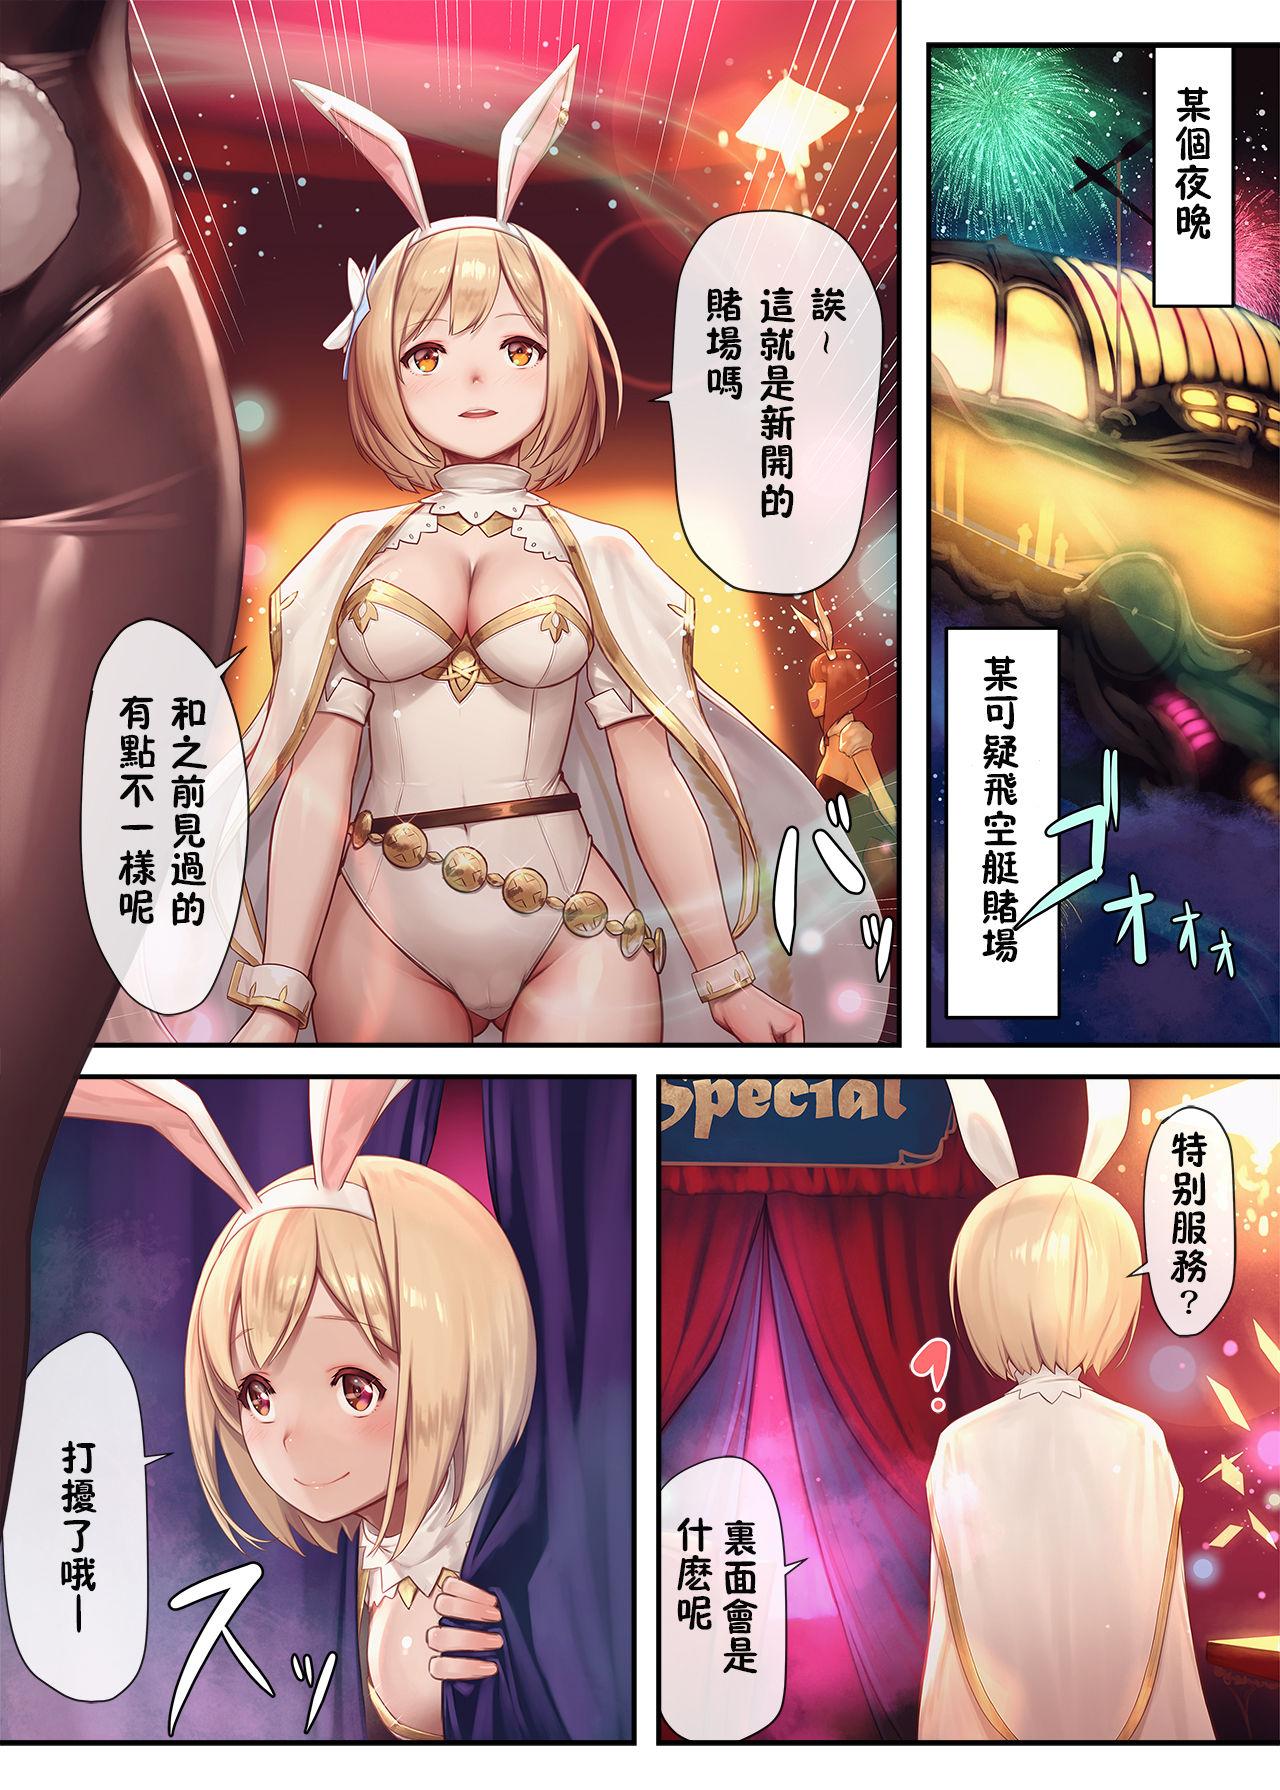 Relax Gentle Blue Fantasy 3 - Granblue fantasy Reverse Cowgirl - Page 3